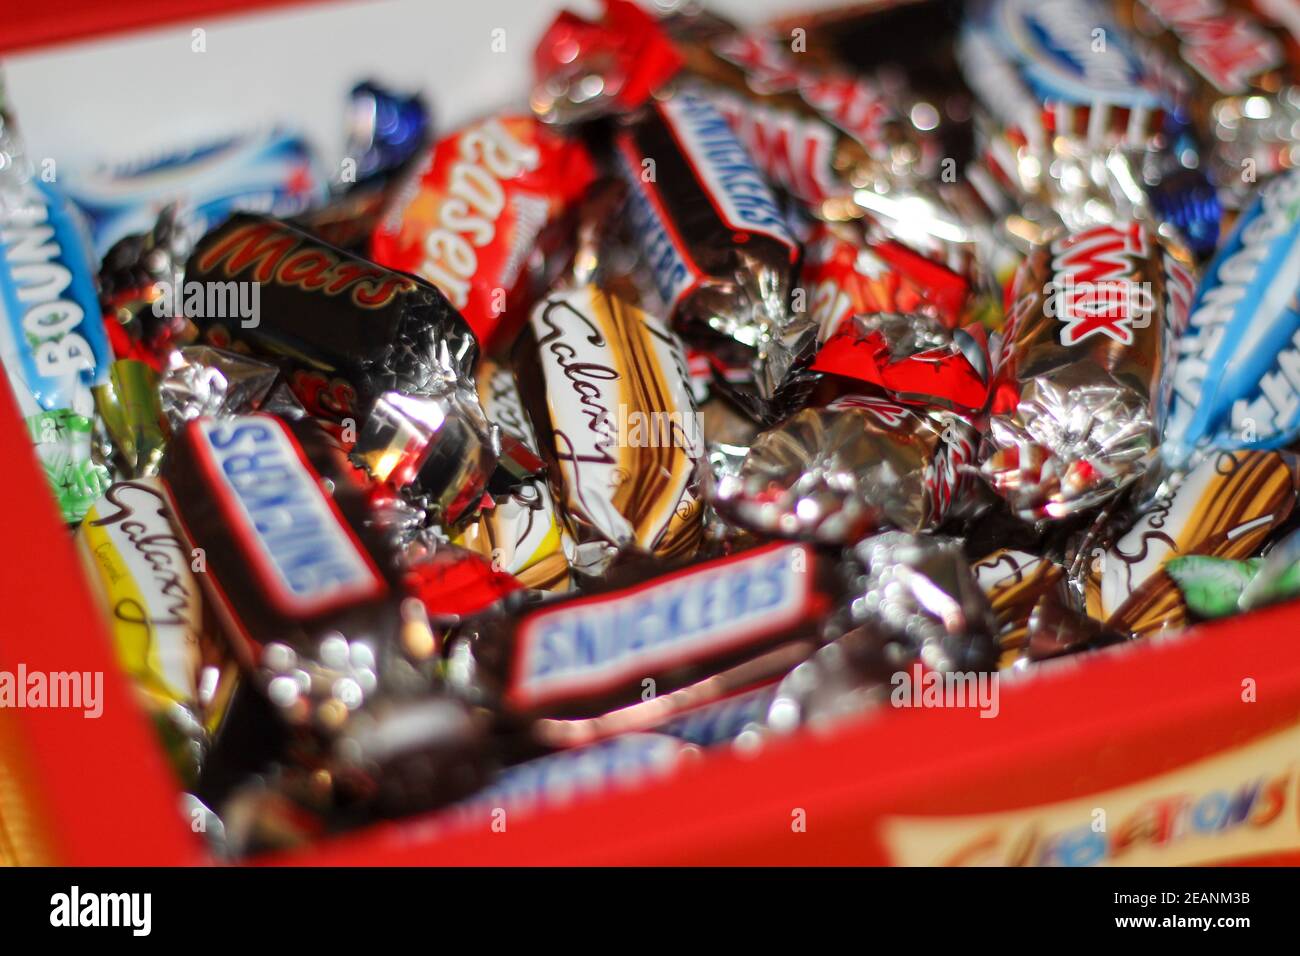 A Bounty chocolate bar, manufactured by Mars, Inc Stock Photo - Alamy